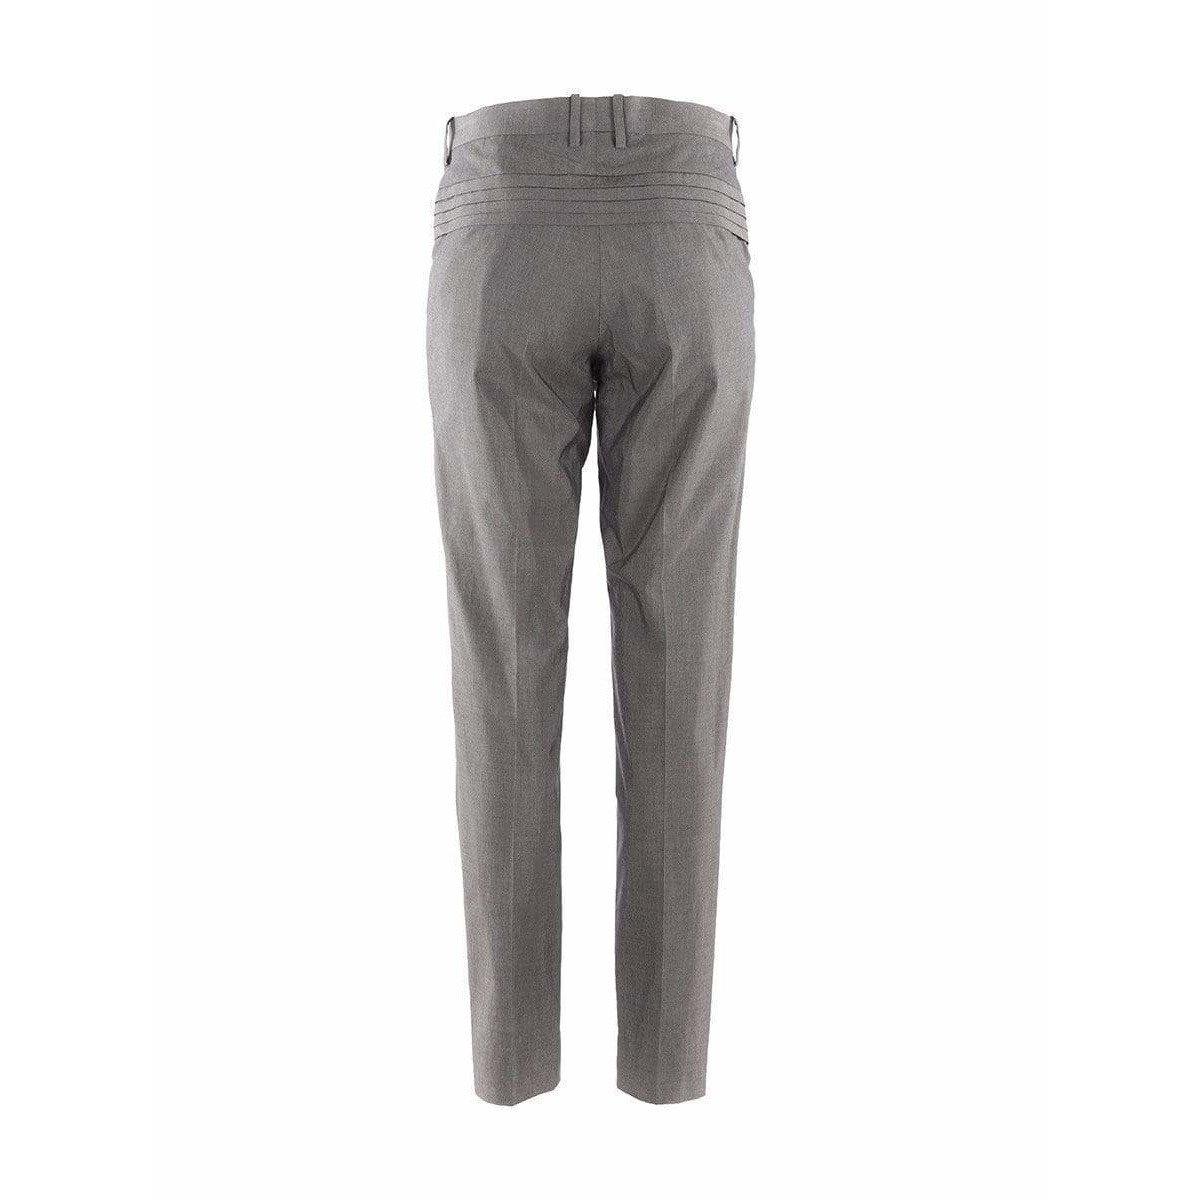 Undercover Grey Pleated Trouser   In New Condition For Sale In Laguna Beach, CA